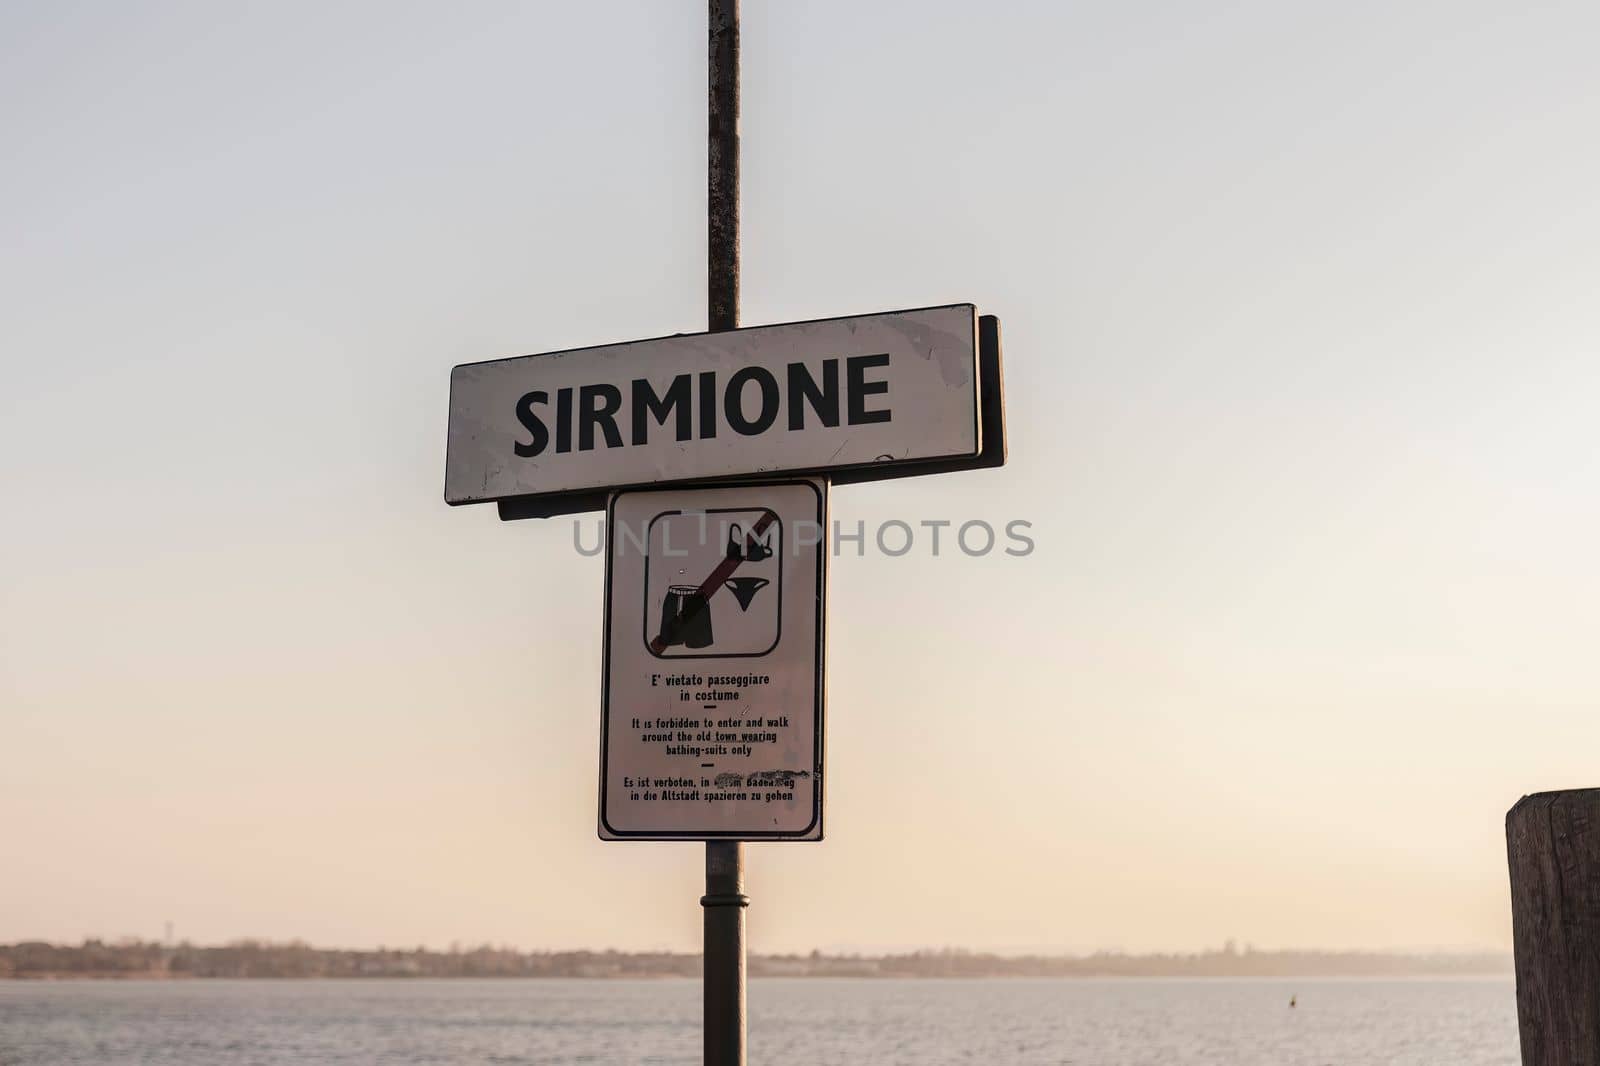 Sirmione sign detail by pippocarlot